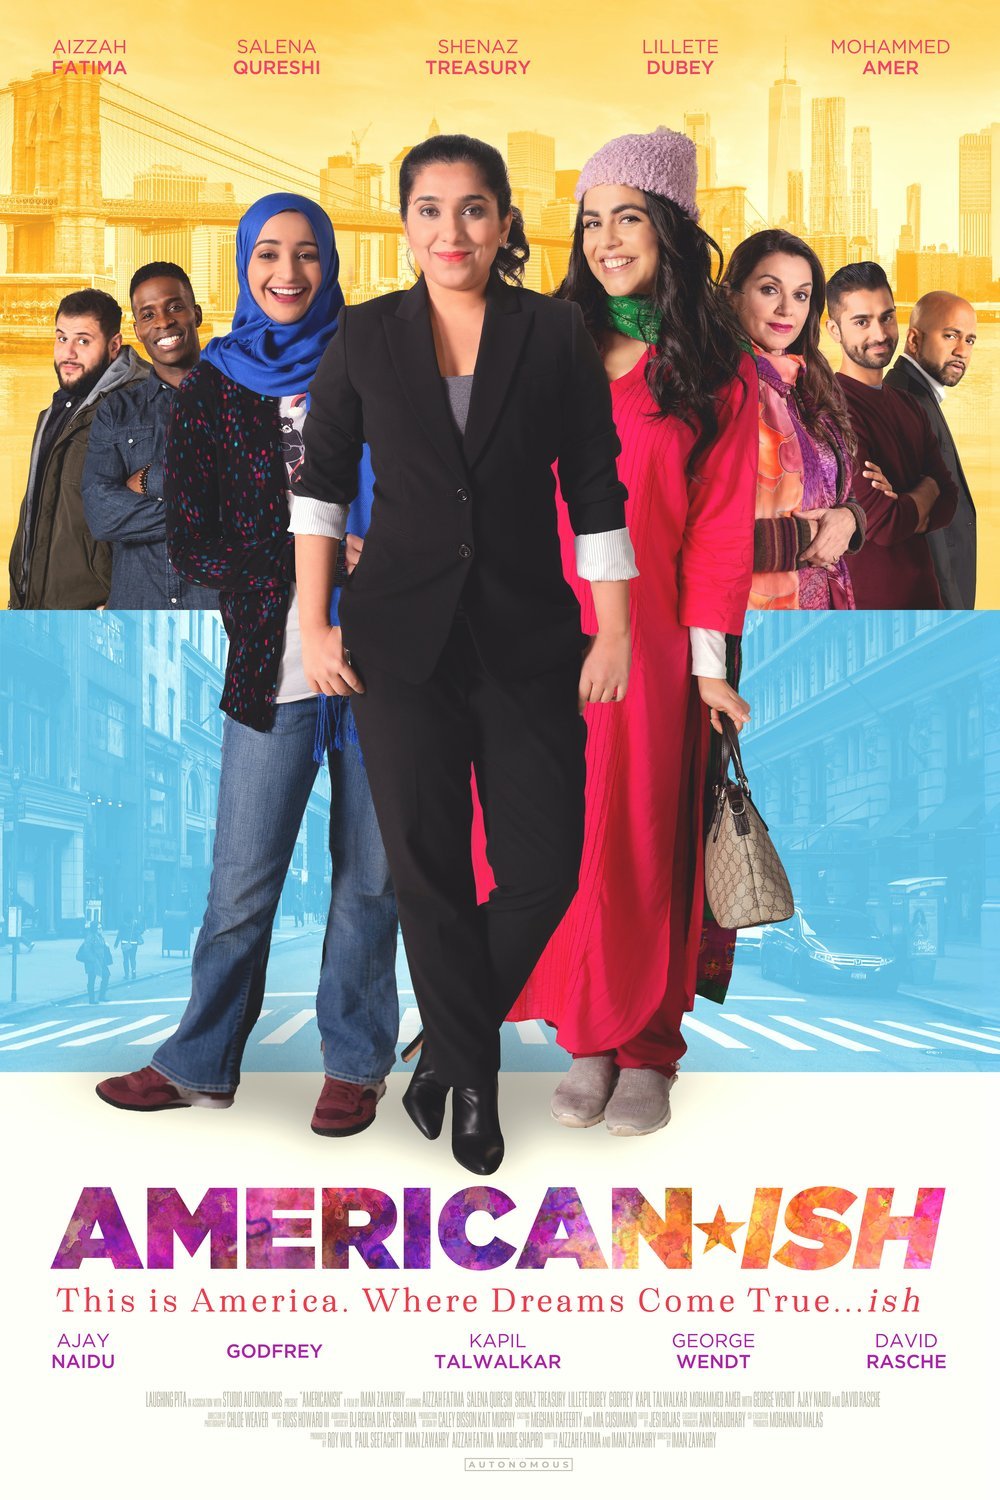 Poster of the movie Americanish